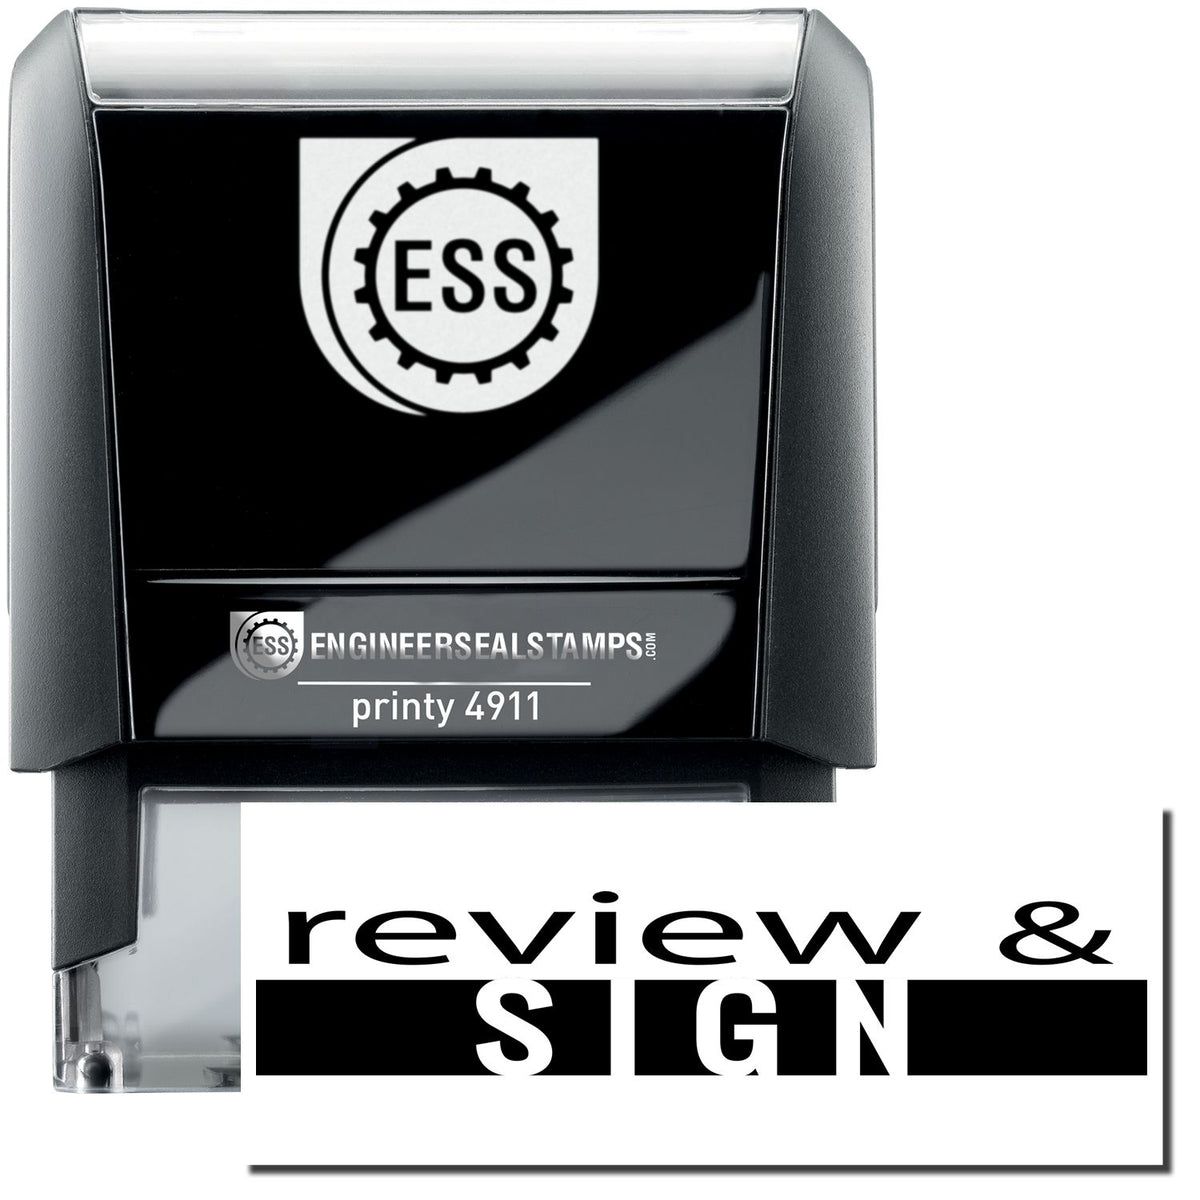 A self-inking stamp with a stamped image showing how the text &quot;review &amp; SIGN&quot; in a bold font with a dual-colored marking is displayed after stamping.